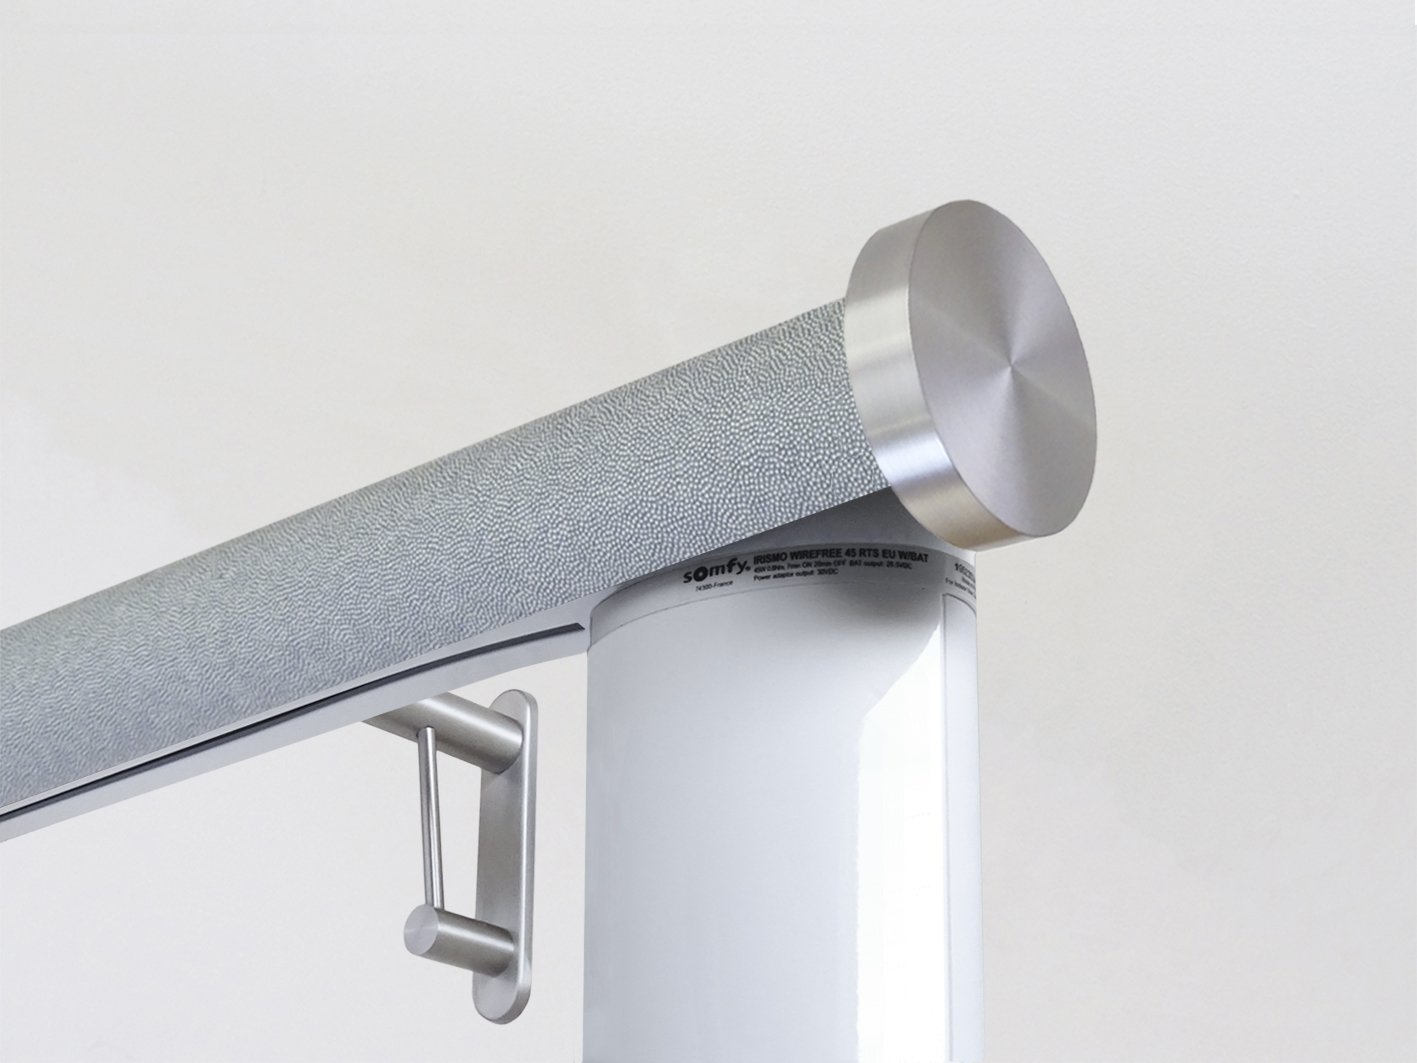 Motorised electric curtain pole in moonlight blue-grey, wireless & battery powered using the Somfy Glydea track | Walcot House UK curtain pole specialists